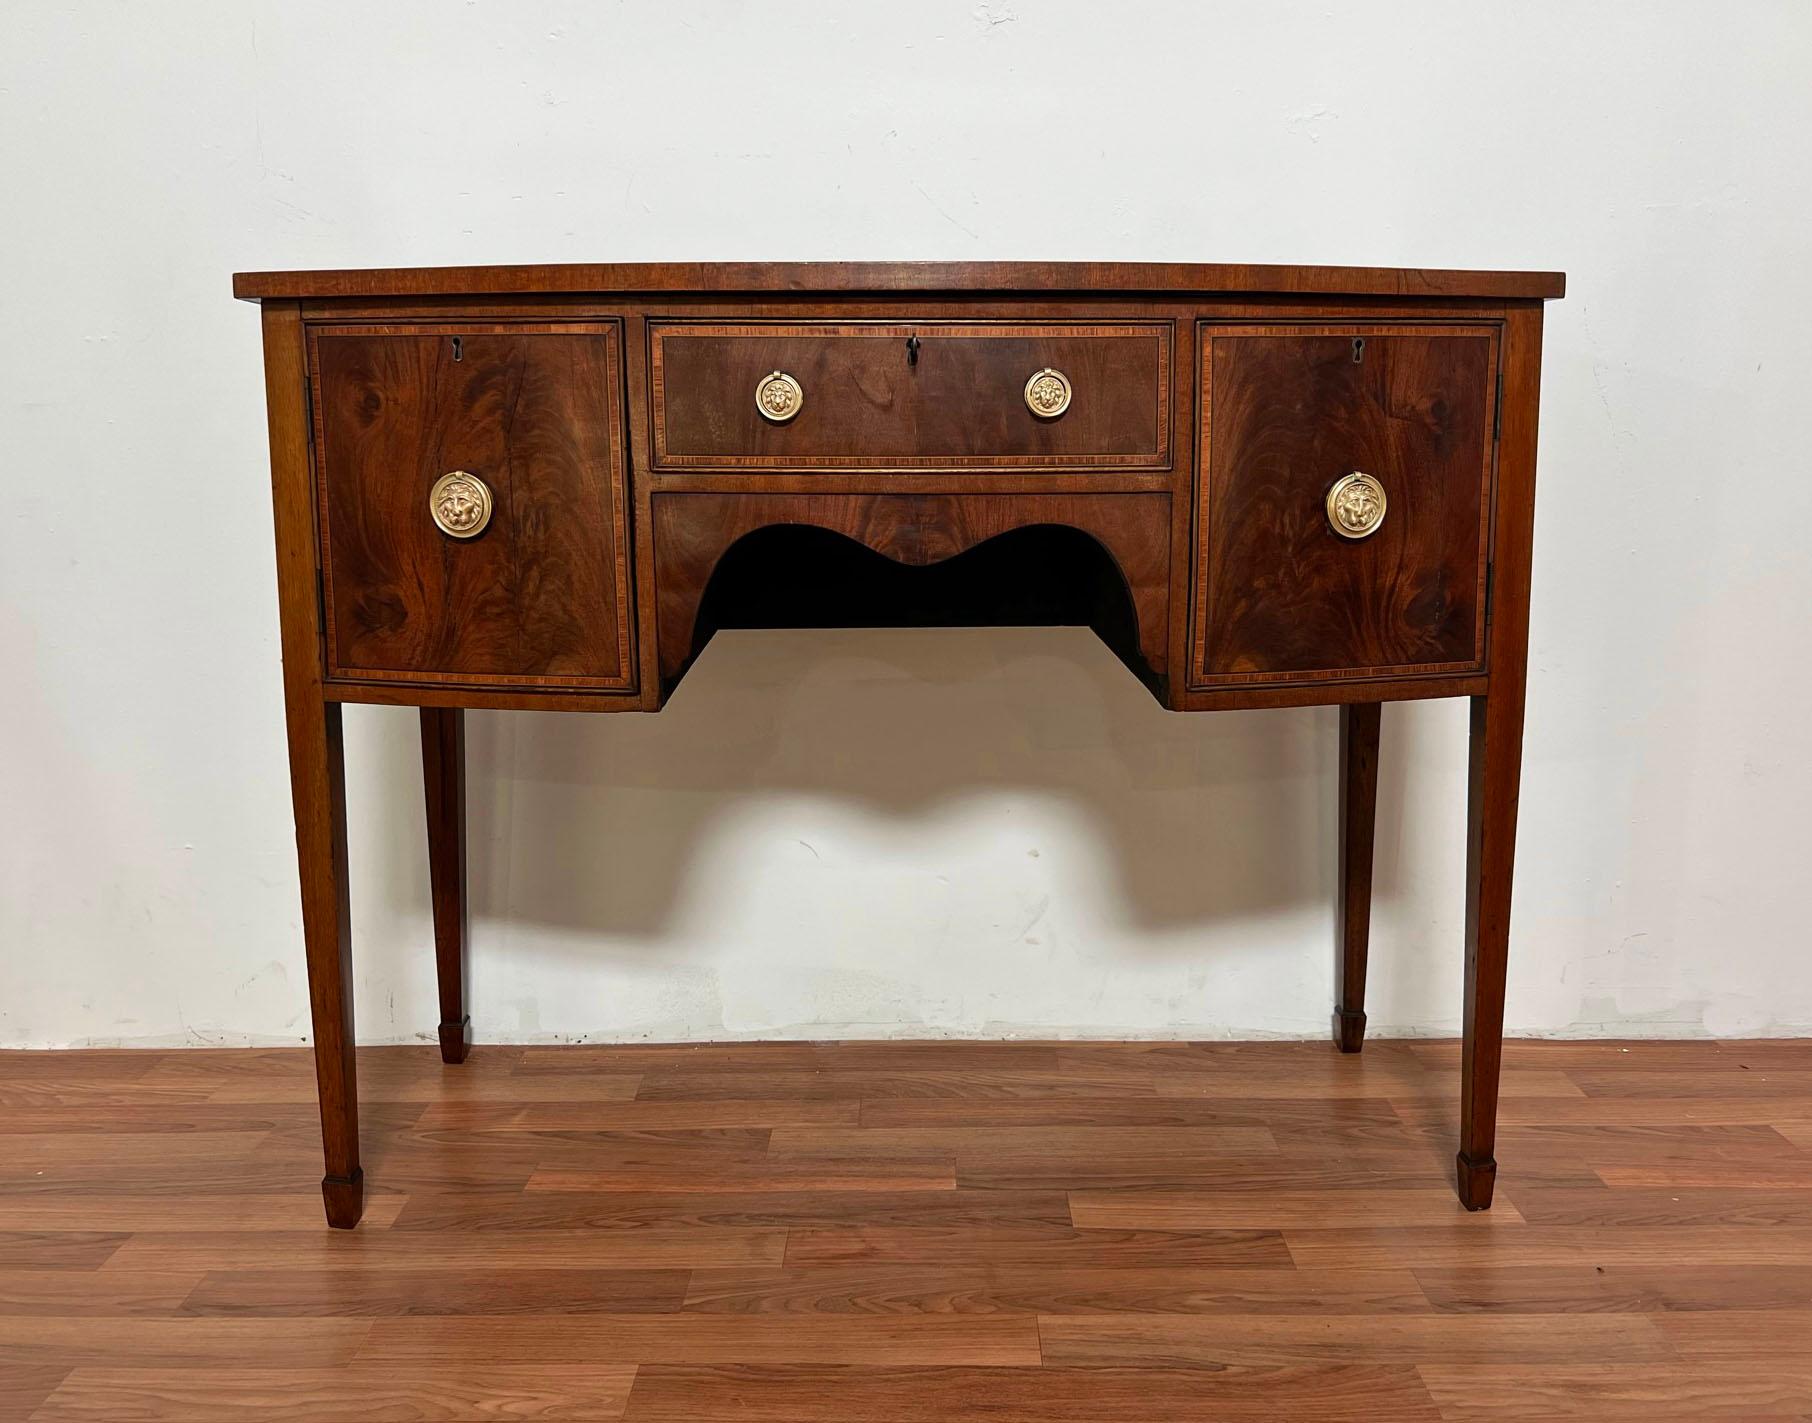 An antique George III era Hepplewhite bow front dressing table, ca. 1810,. Mahogany with contrasting boxwood banding and original rondelle lion head brasses. Also includes original working key.